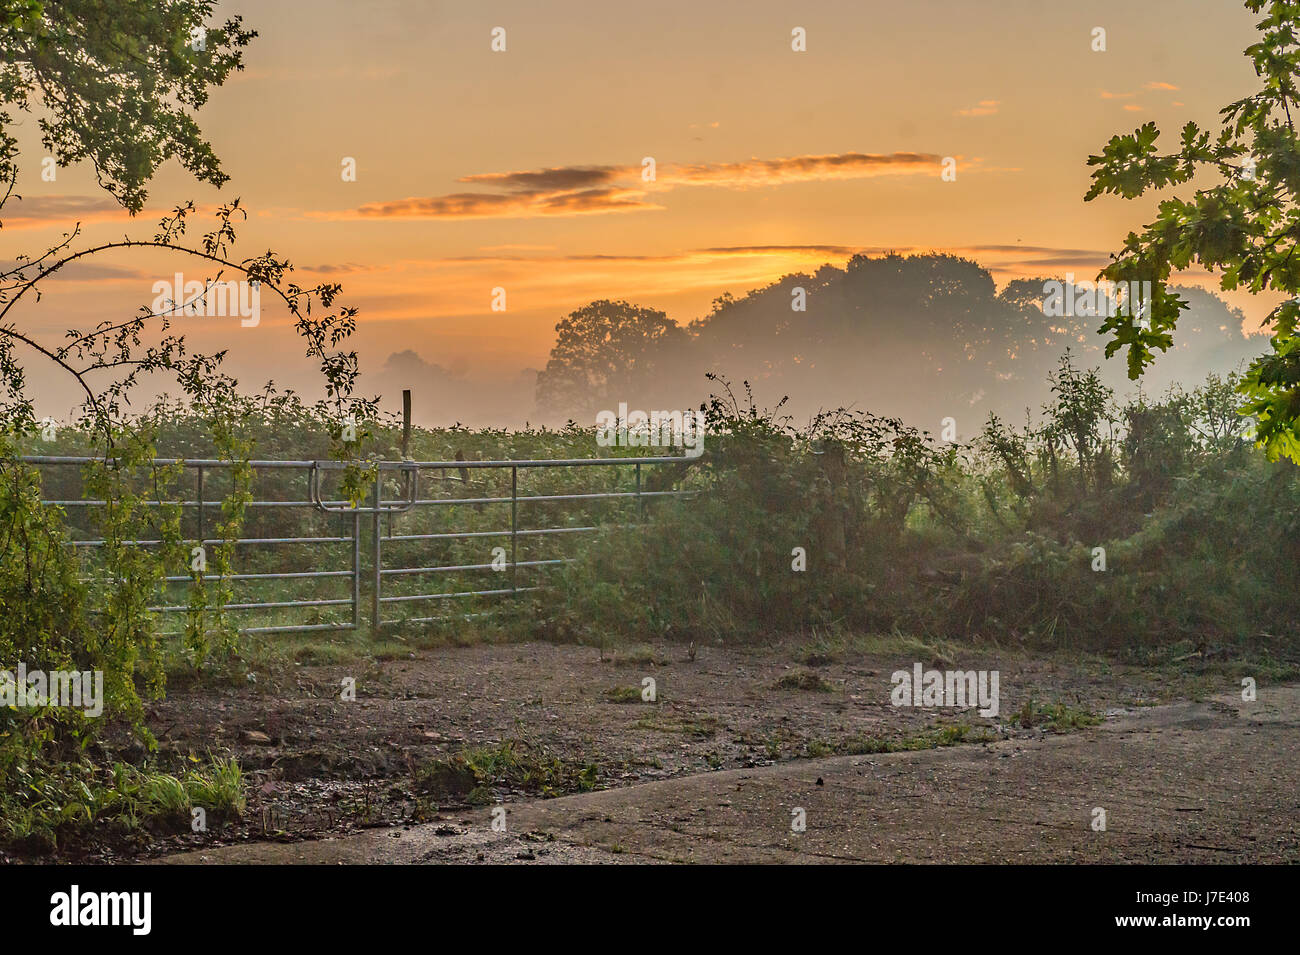 A Golden Dawn rises through the mist over the Farm Gate in rural Sussex England Stock Photo